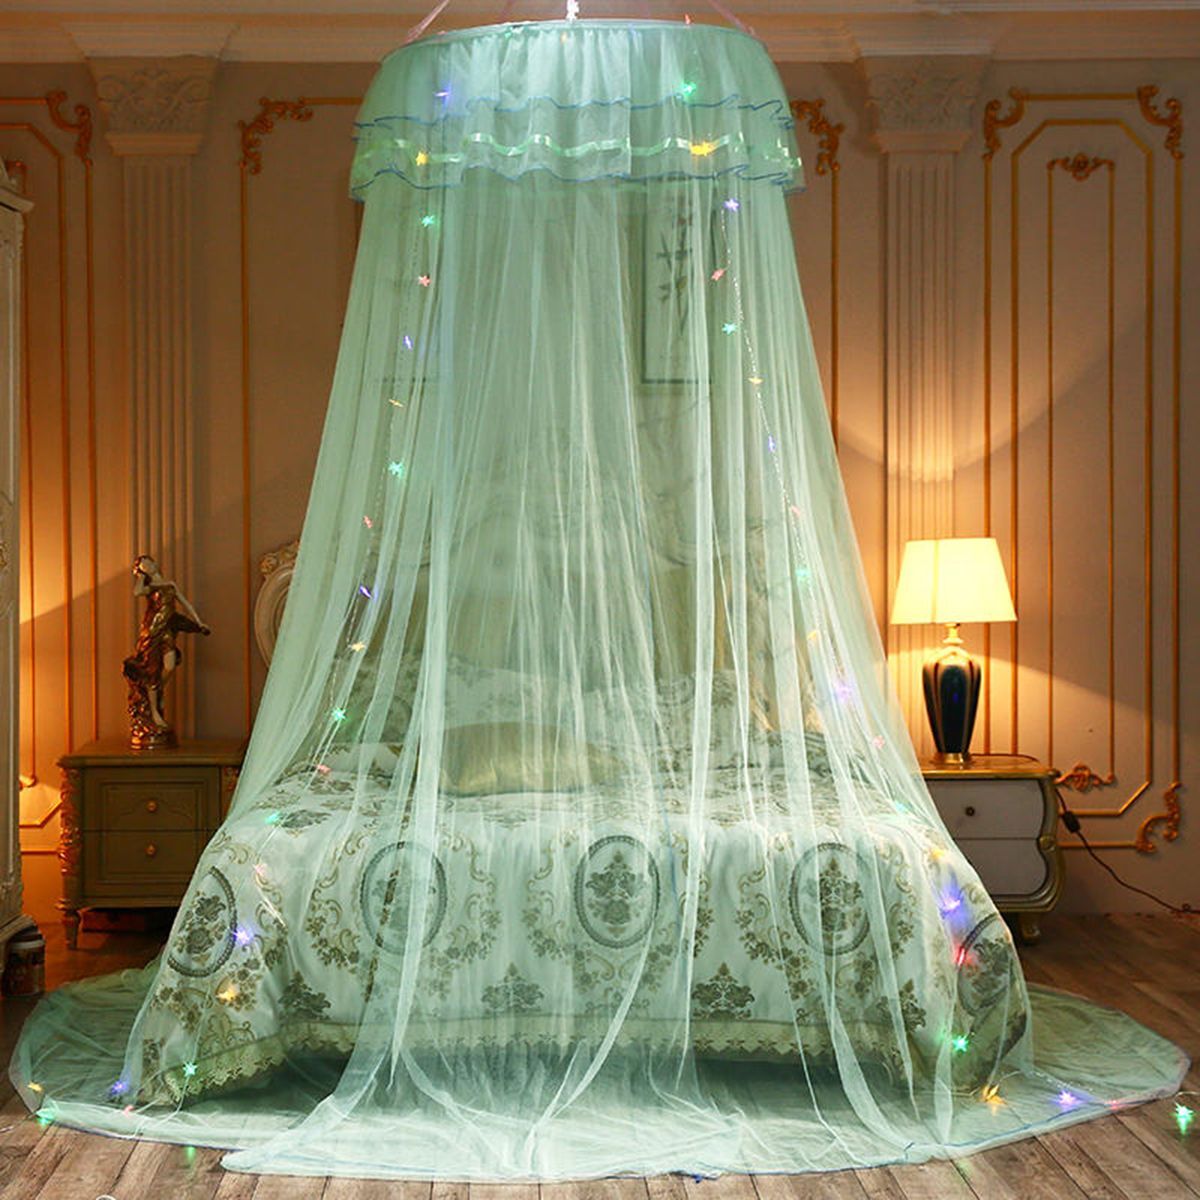 Mosquito-Net-Bedding-Lace-LED-Light-Princess-Dome-Mesh-Bed-Canopy-Bedroom-Decor-1682937